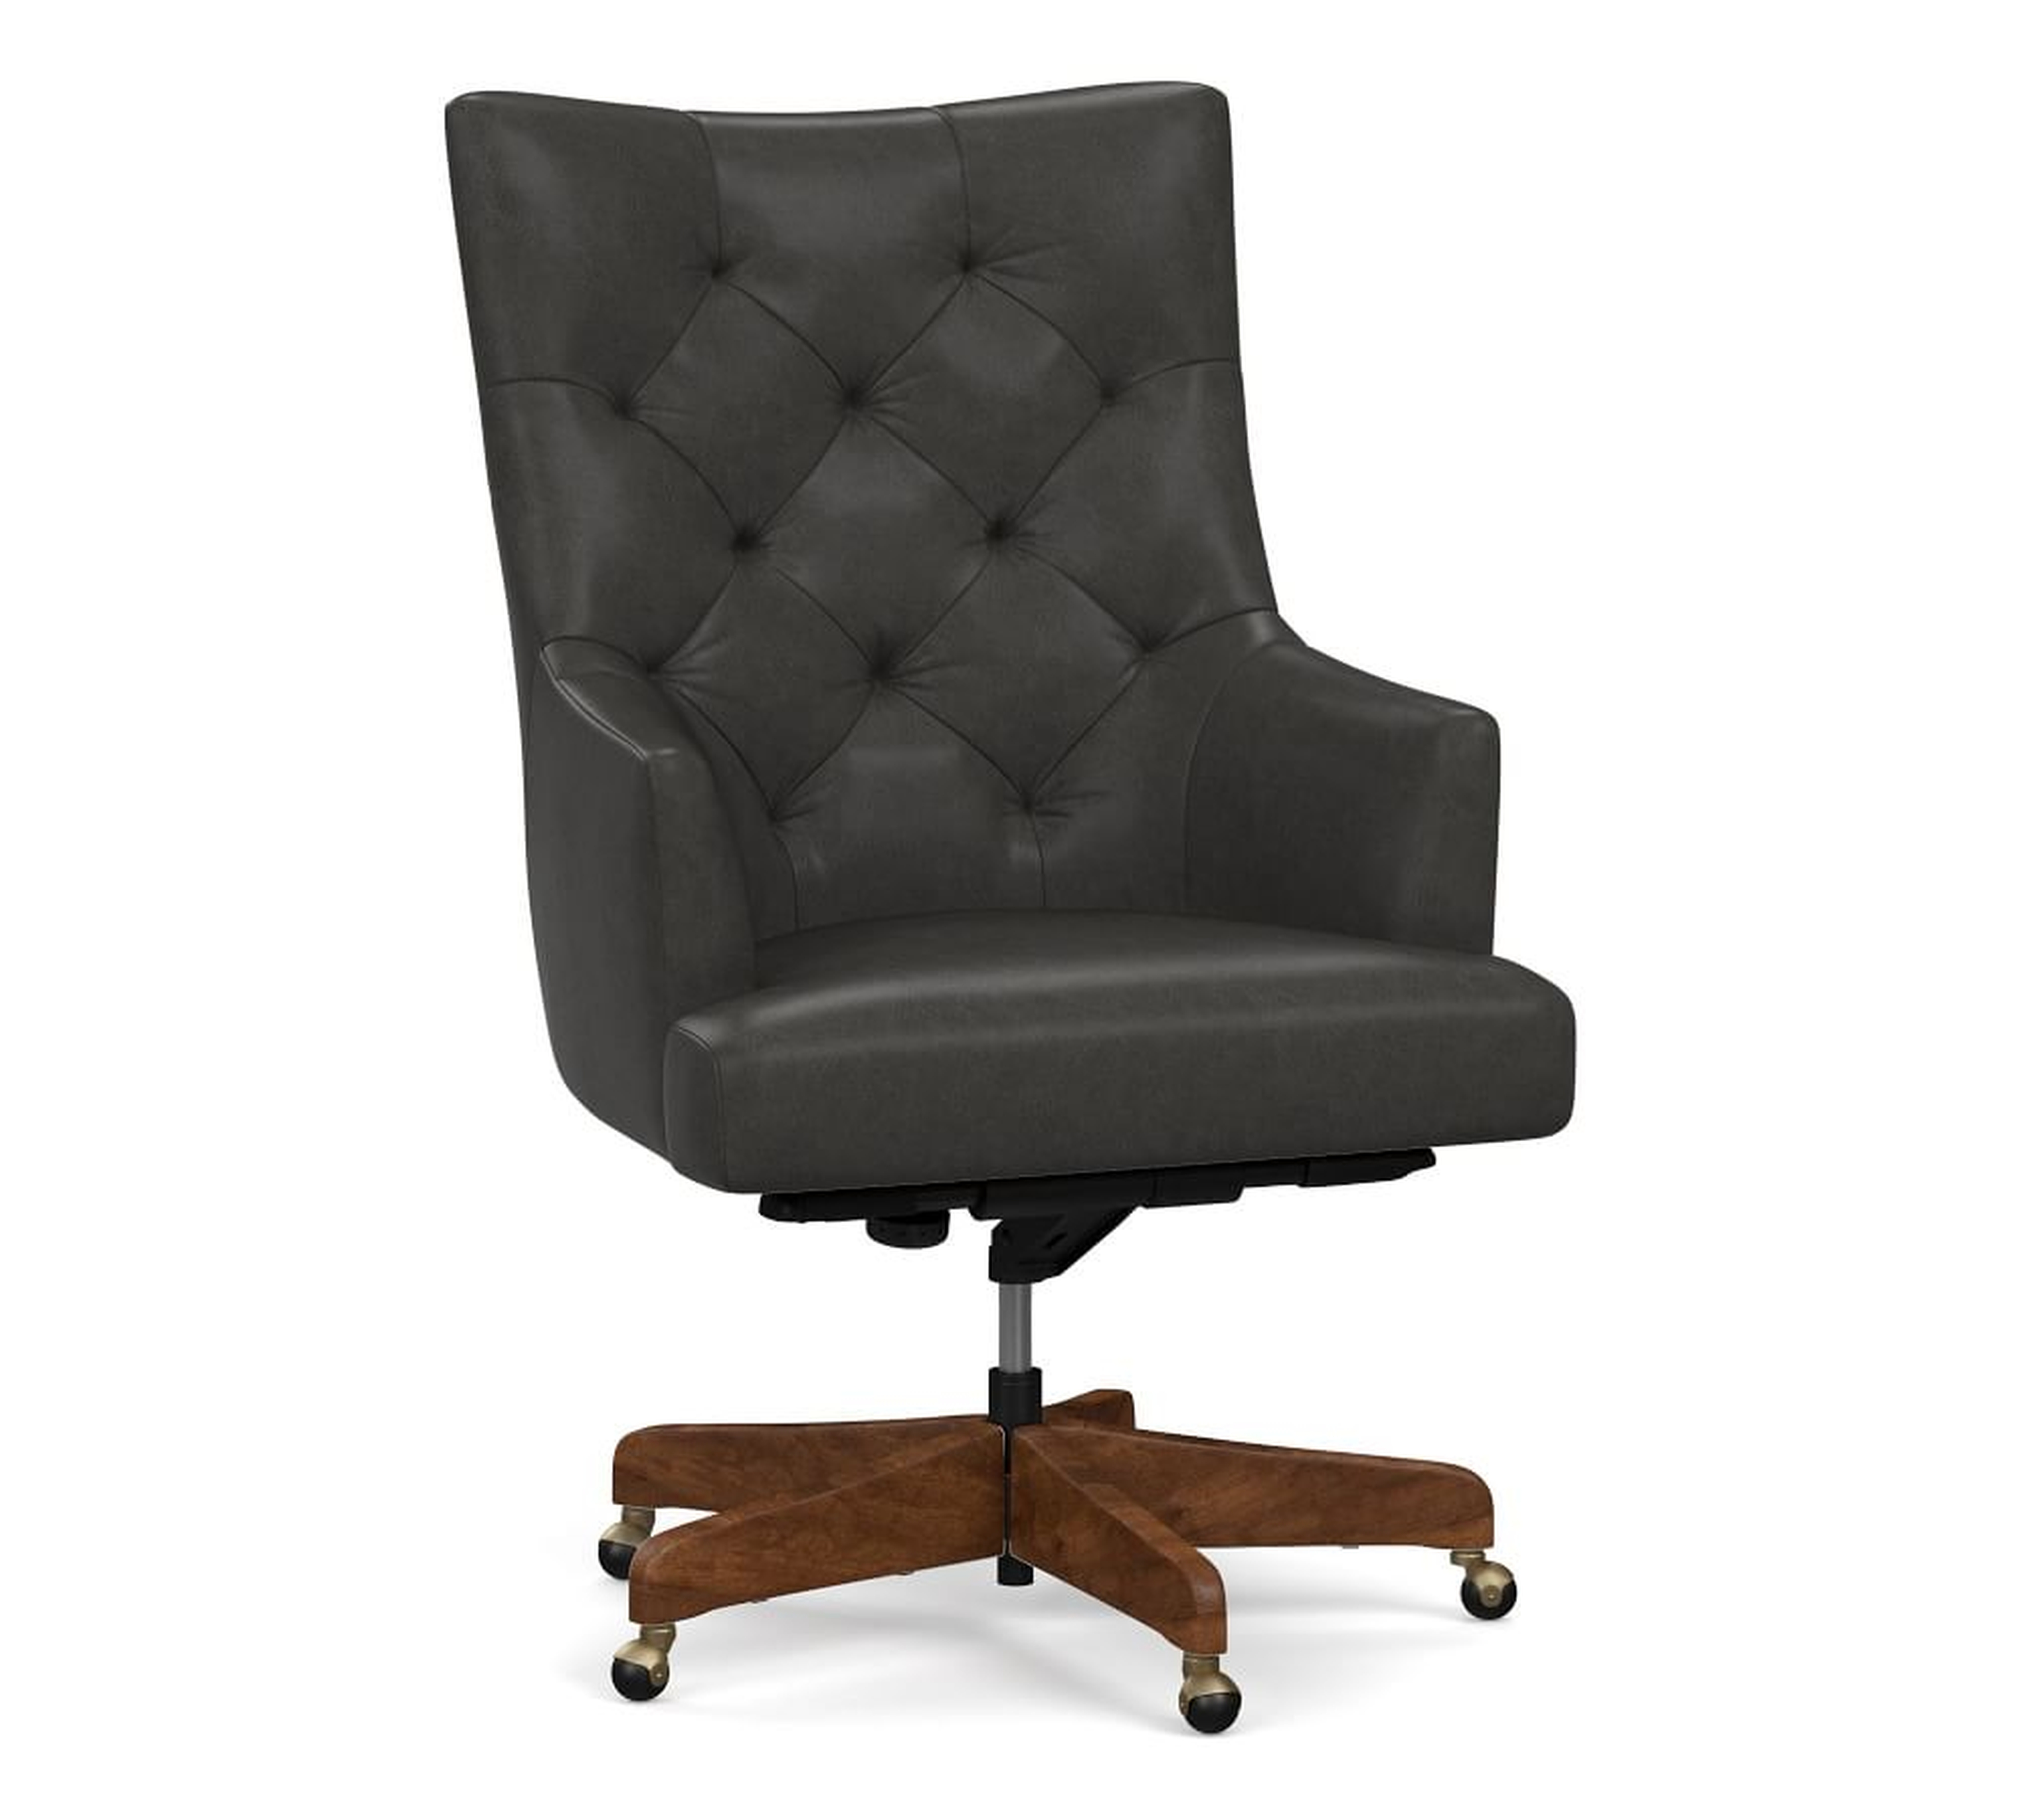 Radcliffe Leather Desk Chair Rustic Brown Base, Black Buffalo - Pottery Barn